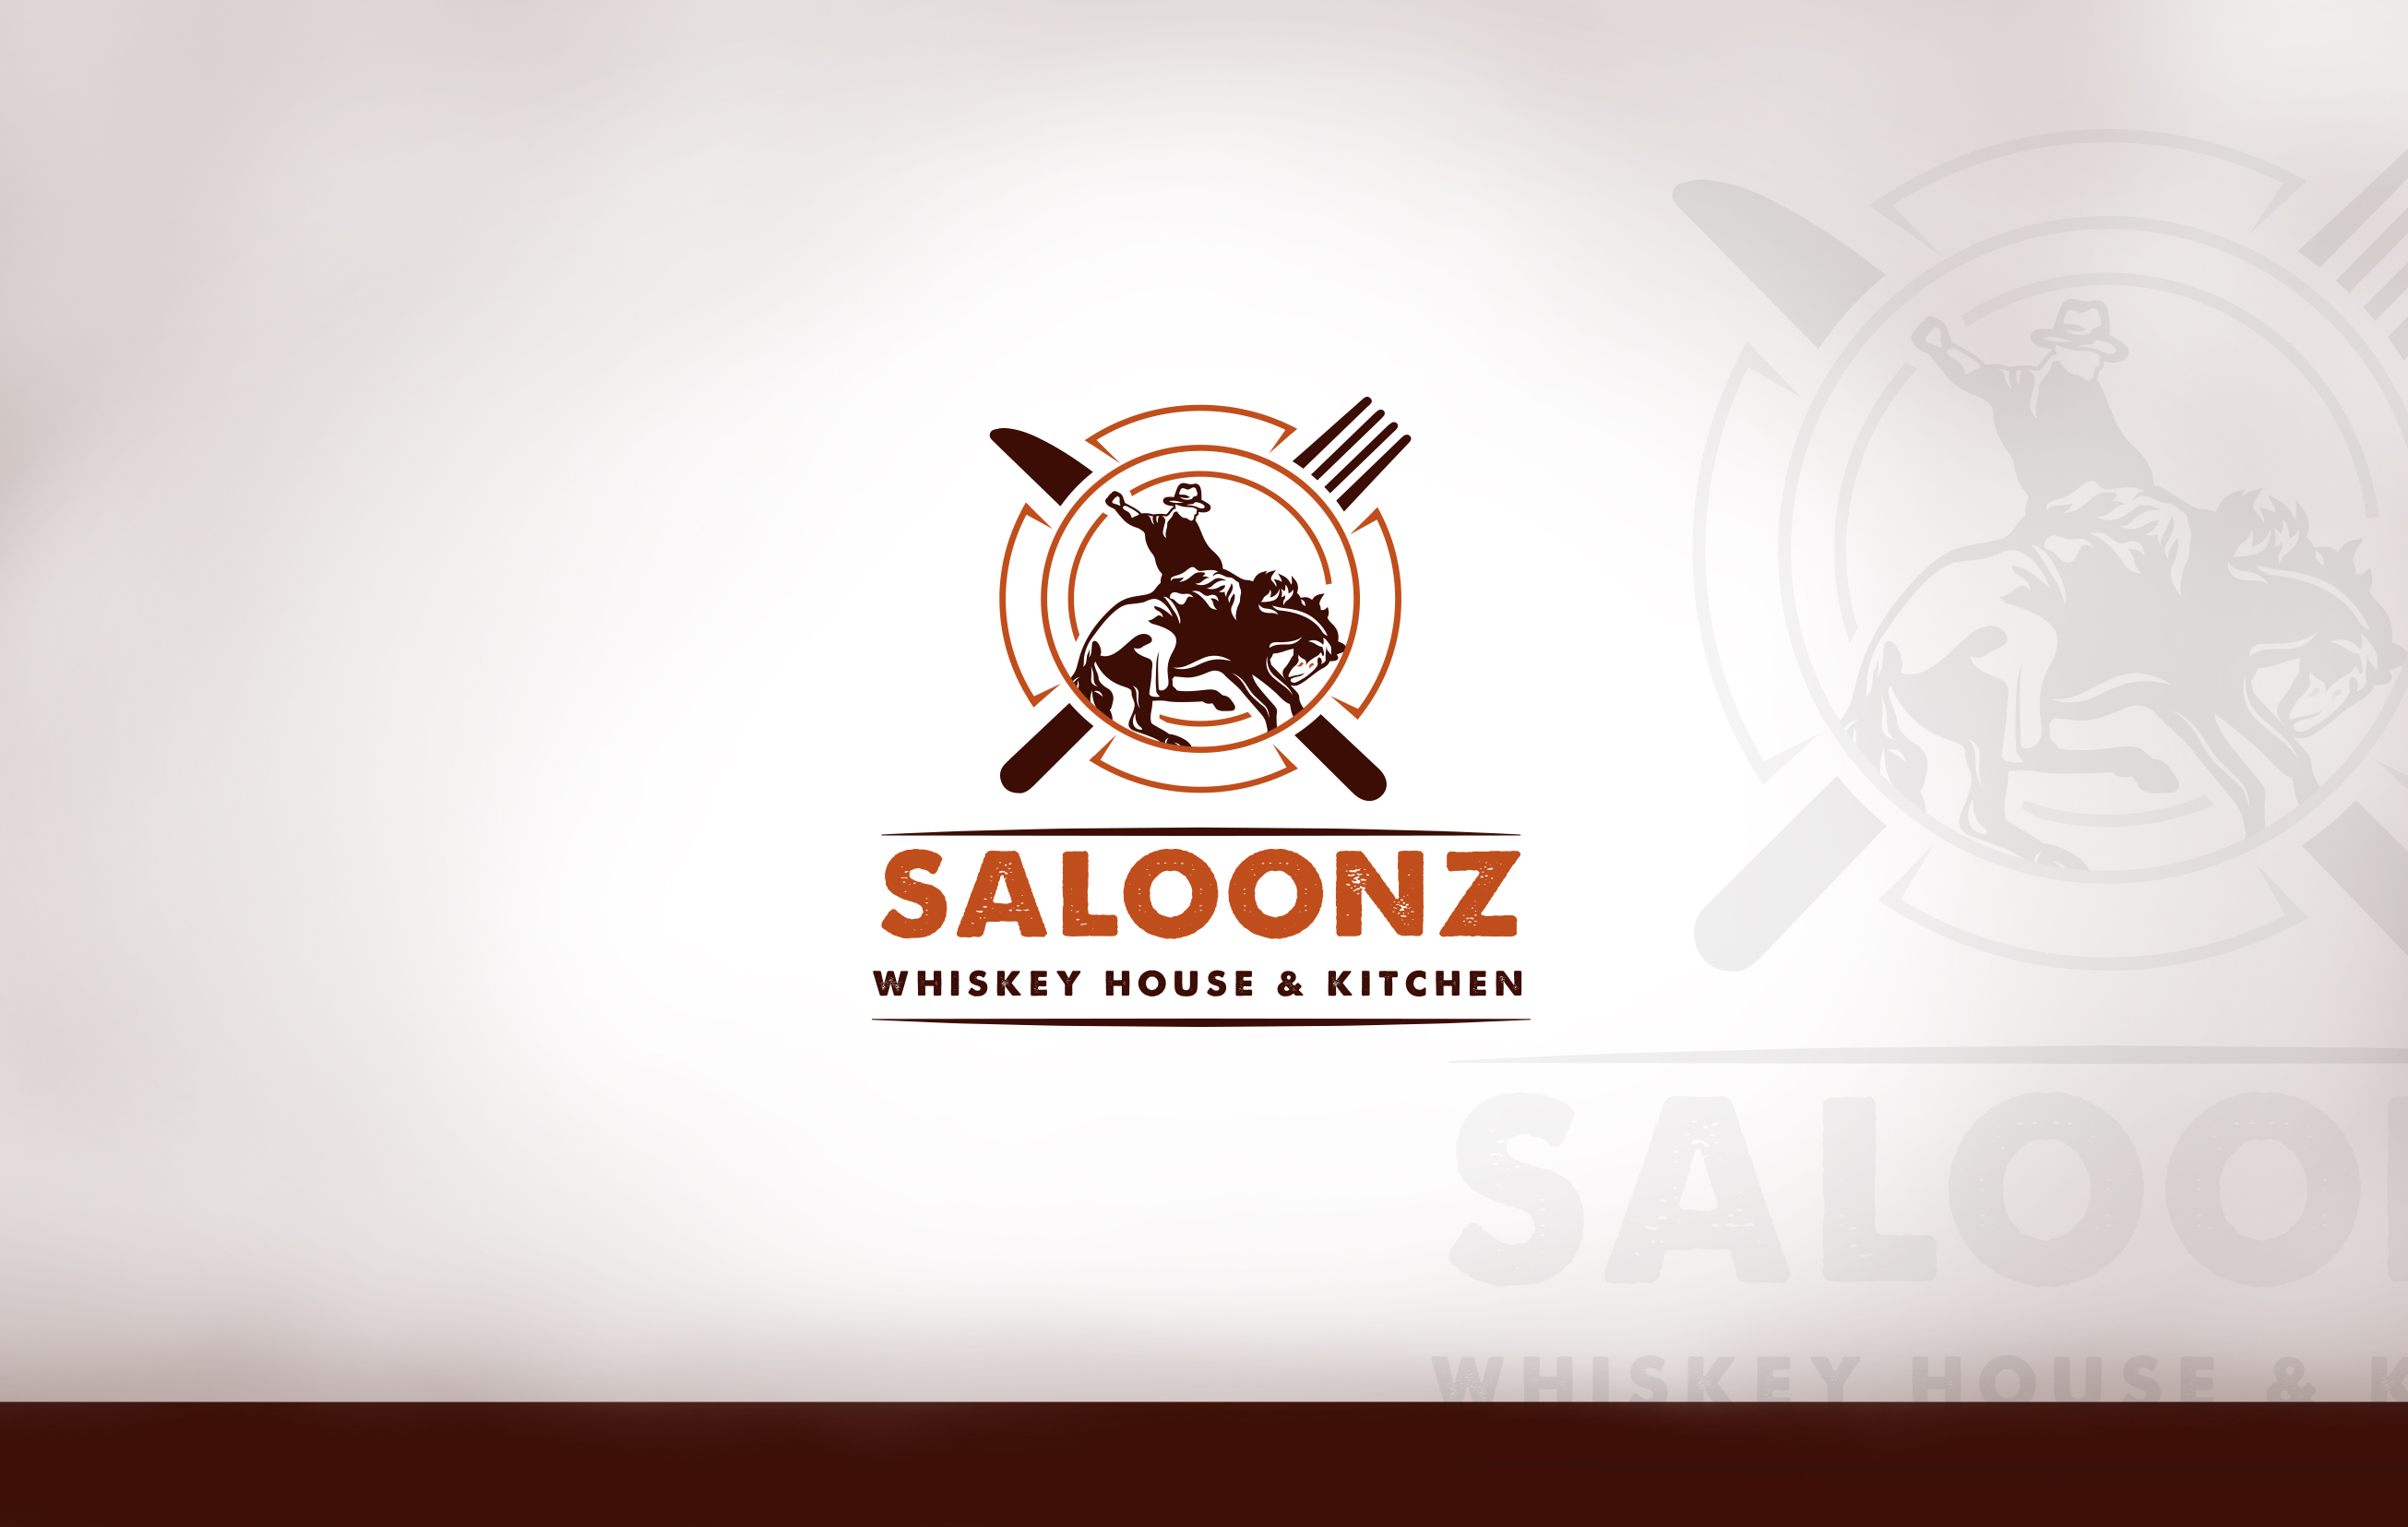 Saloonz Whiskey House and Kitchen Design #3